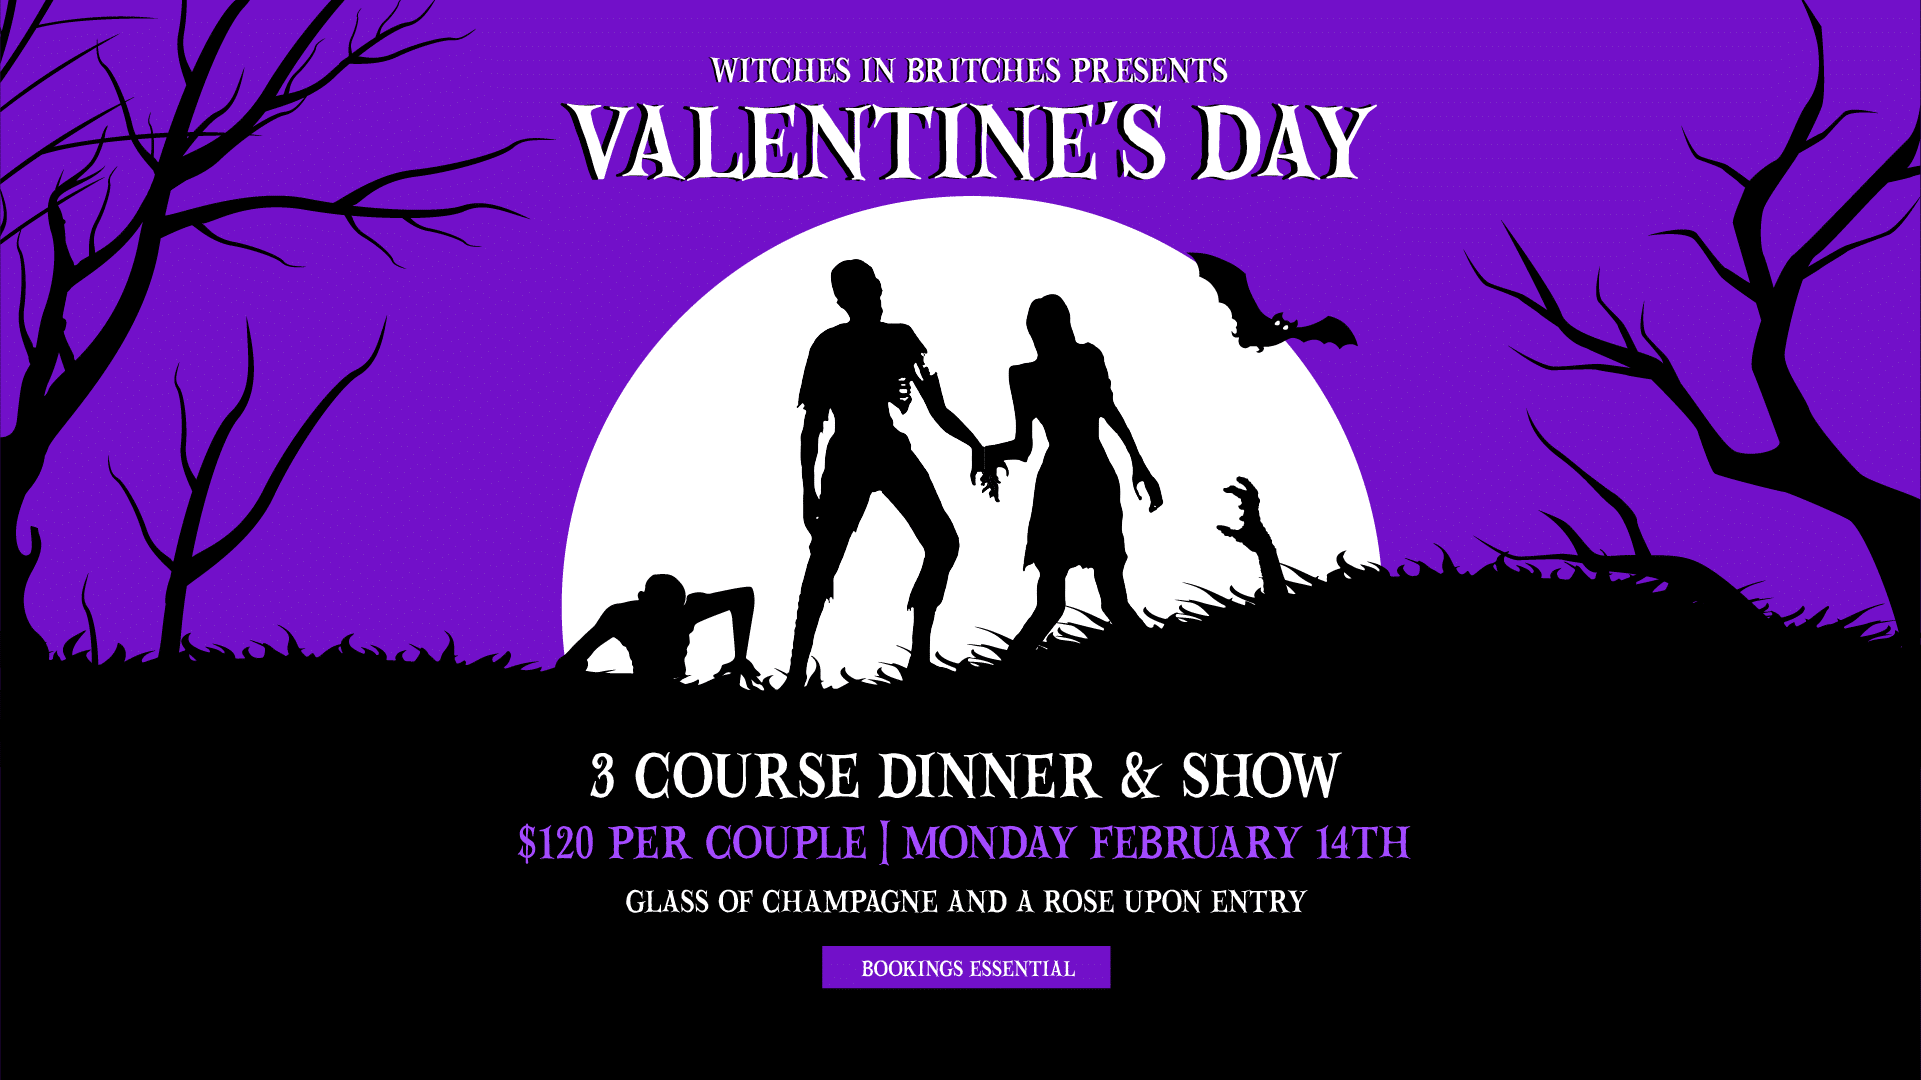 Join us for a Spooktacular Valentine’s Day!